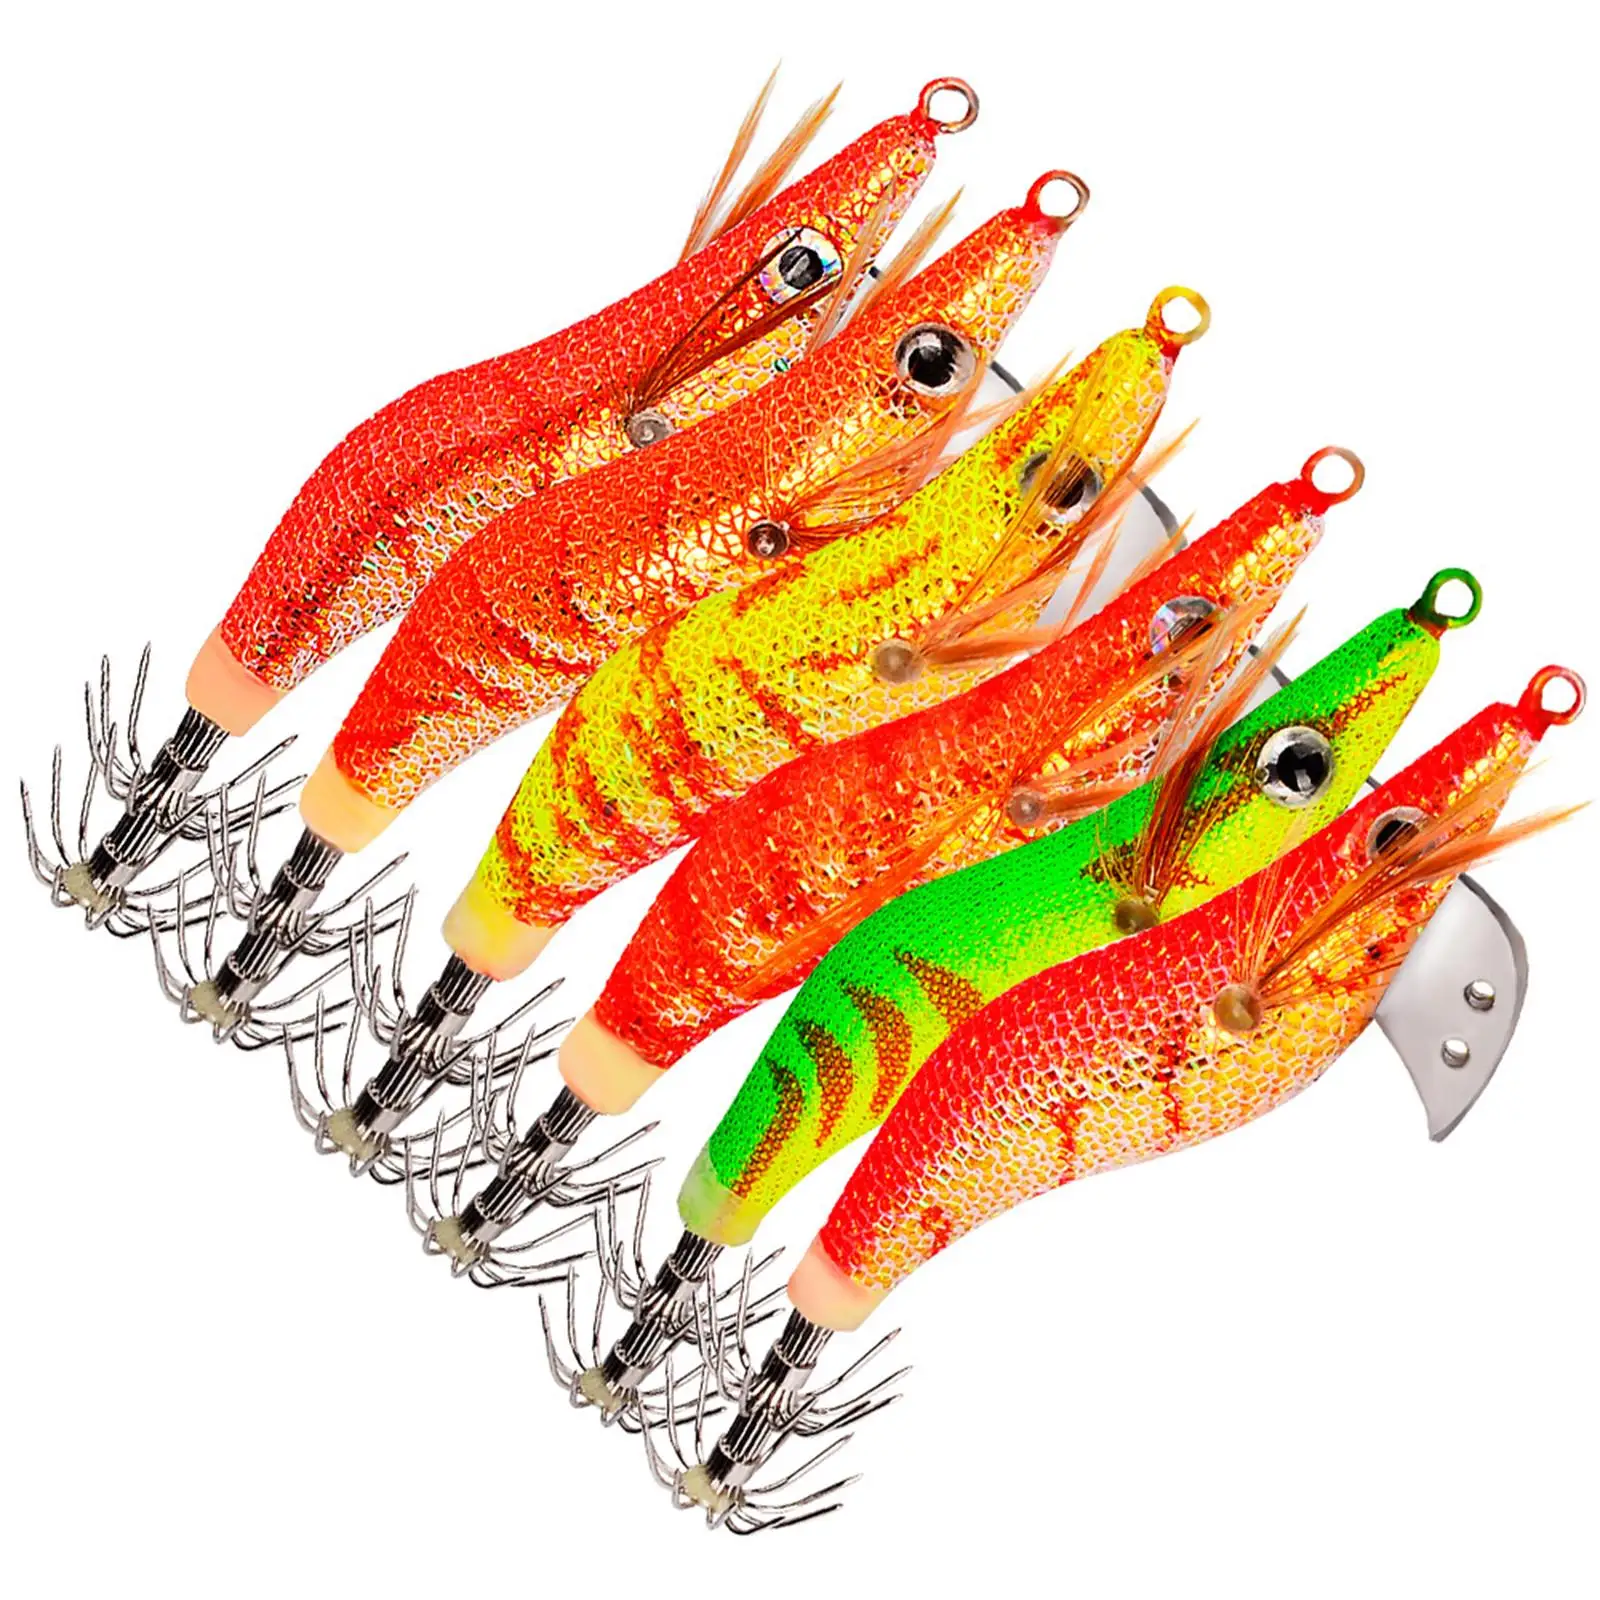 6Pcs Squid Fishing Lures Fishing Gear Fishing Accessory Artificial Squid Cuttlefish Sleeve Lure Hook for Freshwater Fishing